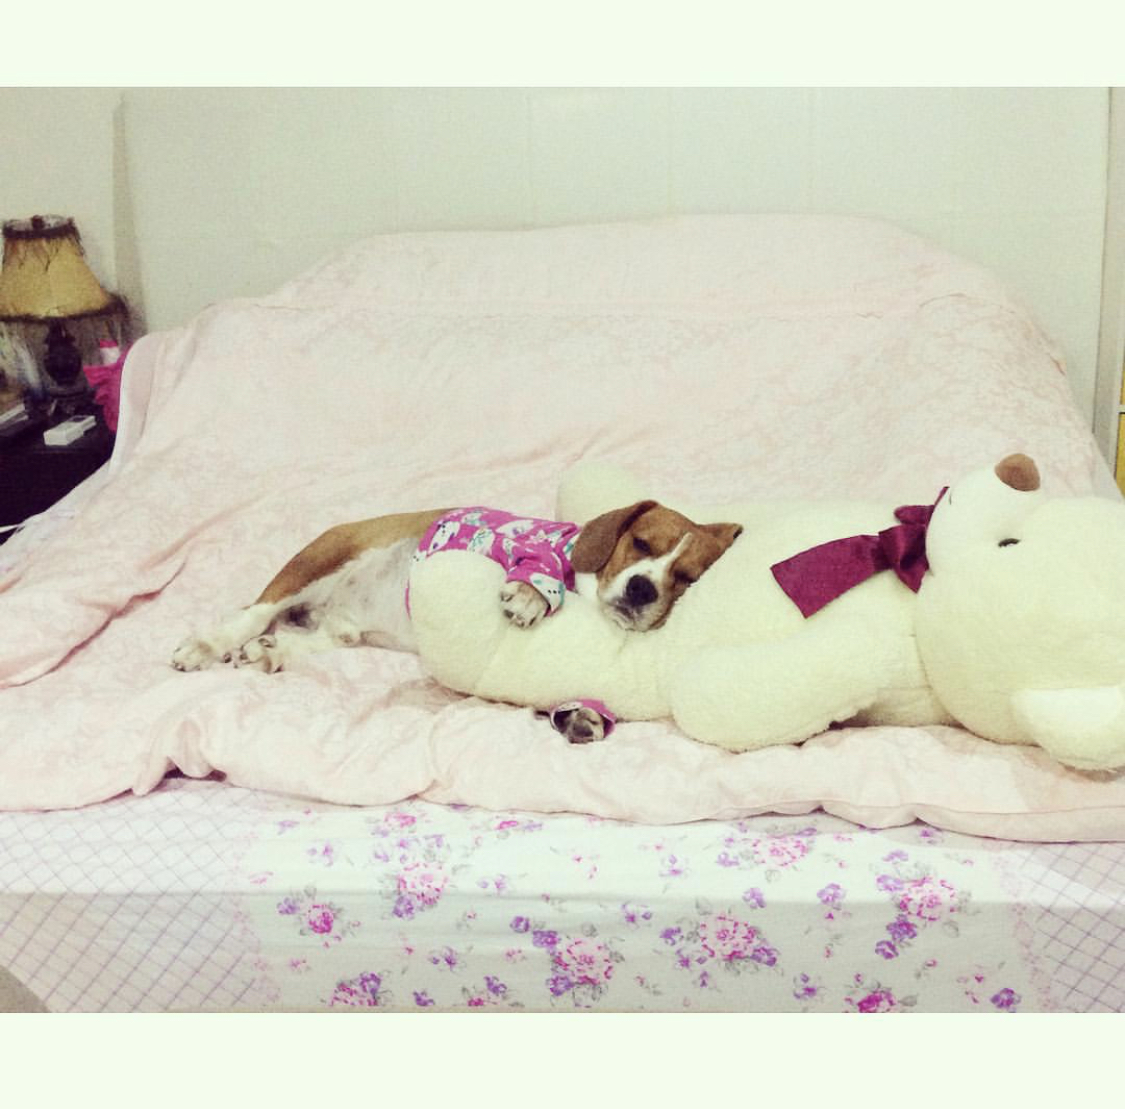 Beagle sleeping on the bed while hugging the feet of a large teddy bear